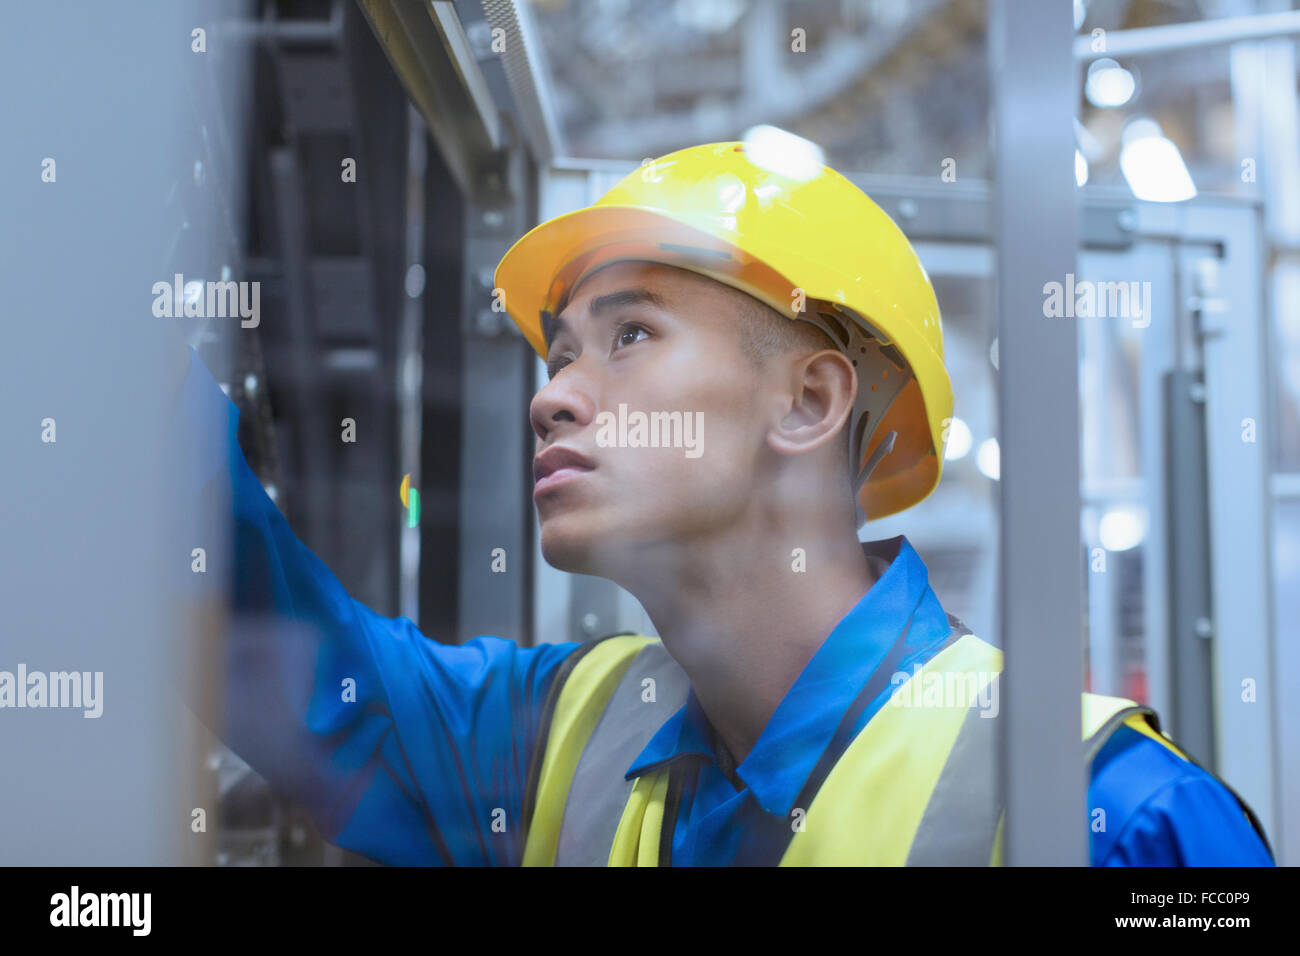 Worker in hard-hat examining machinery in factory Stock Photo